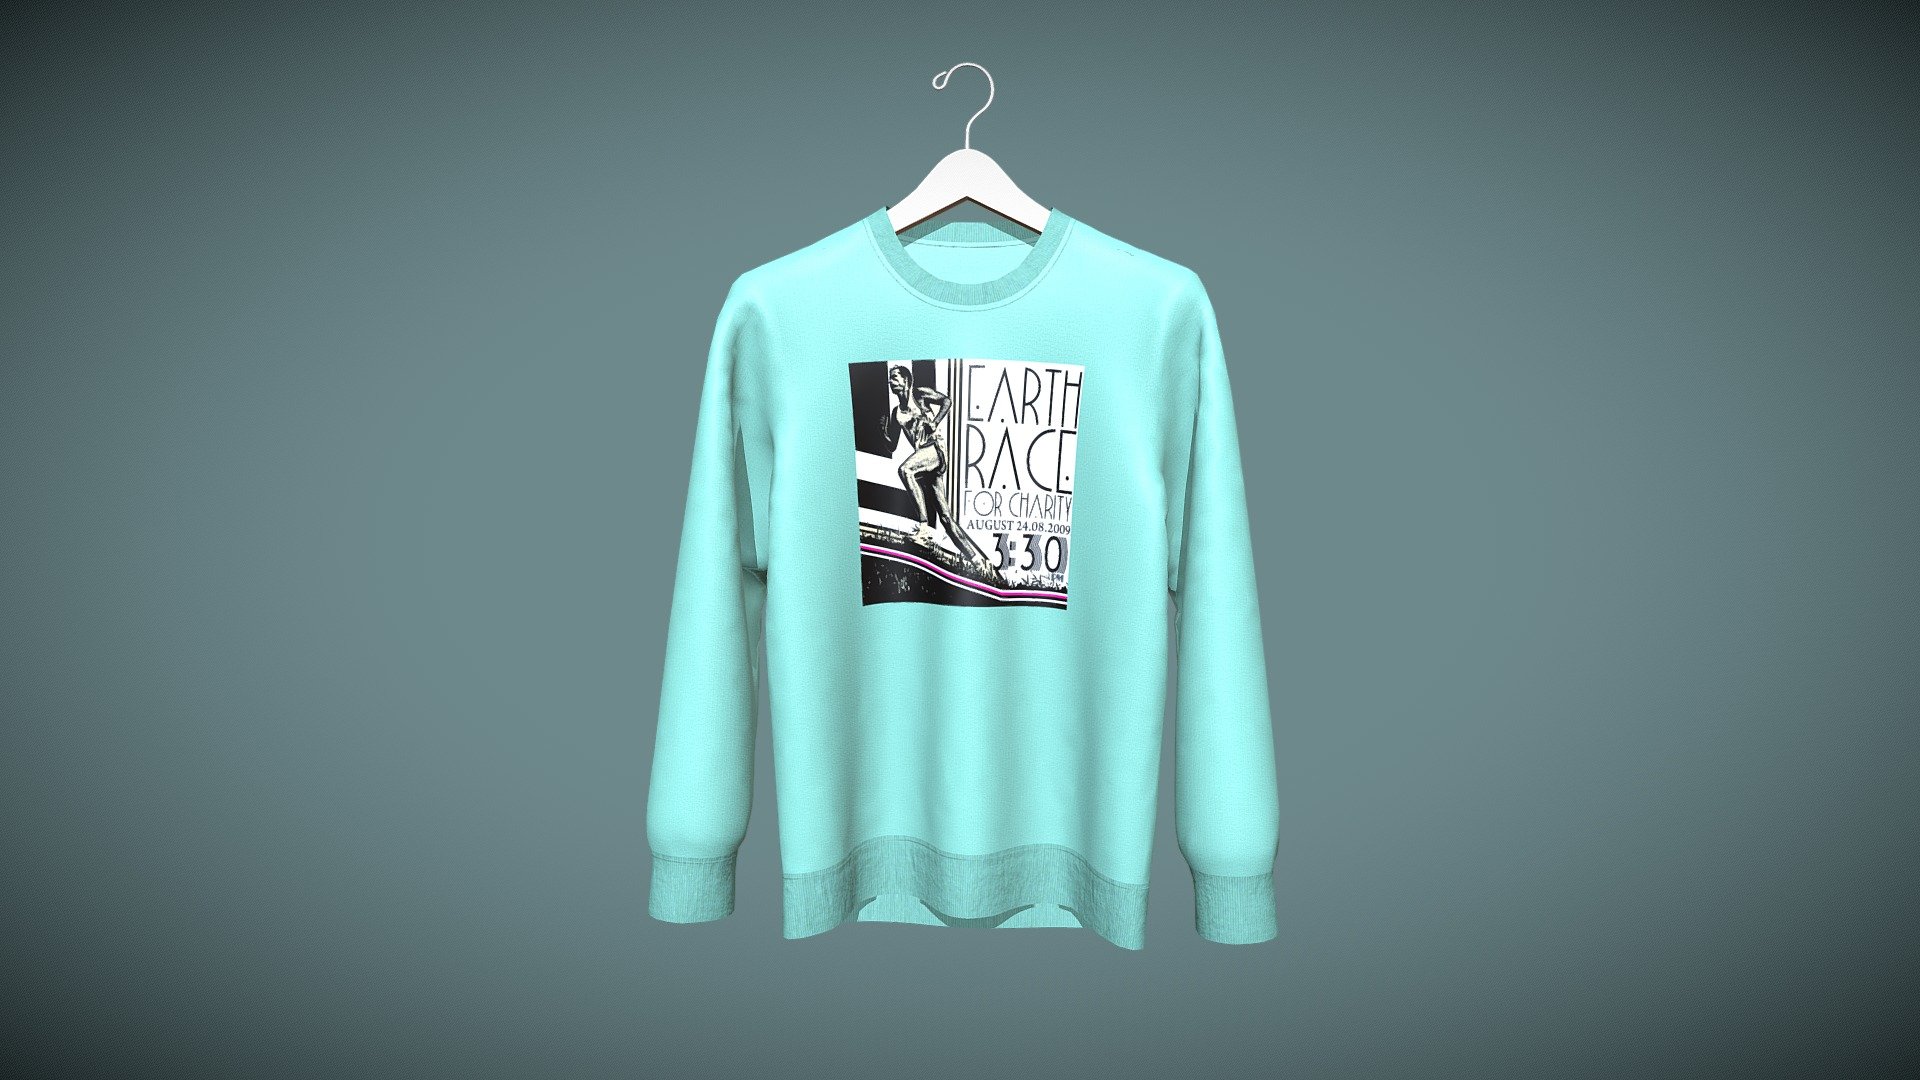 Sweatshirt-EARTH RACE

I am a Professional 3D Fashion/Apprel Designer. I have 7 years working experience about 3D Fashion. I am working with Clo3d, Marvelous Designer (MD), Daz3d, Blender, Cinema4d, Etc.

Features:
1.  2k UV Texture
2.  Triangle mesh
3.  Textures with Non-overlapping UV Map (2048x2048 Pixels)
4.  In additonal Textures folder have diffuse,displacement,metalness,normal,opacity,roughness maps.

Attachment Fils:
Exported Files (All are exported in DAZ Studio scale)
* OBJ
* FBX
* Marvelous Designer/Clo3d file (zprj)

Thanks 3d model